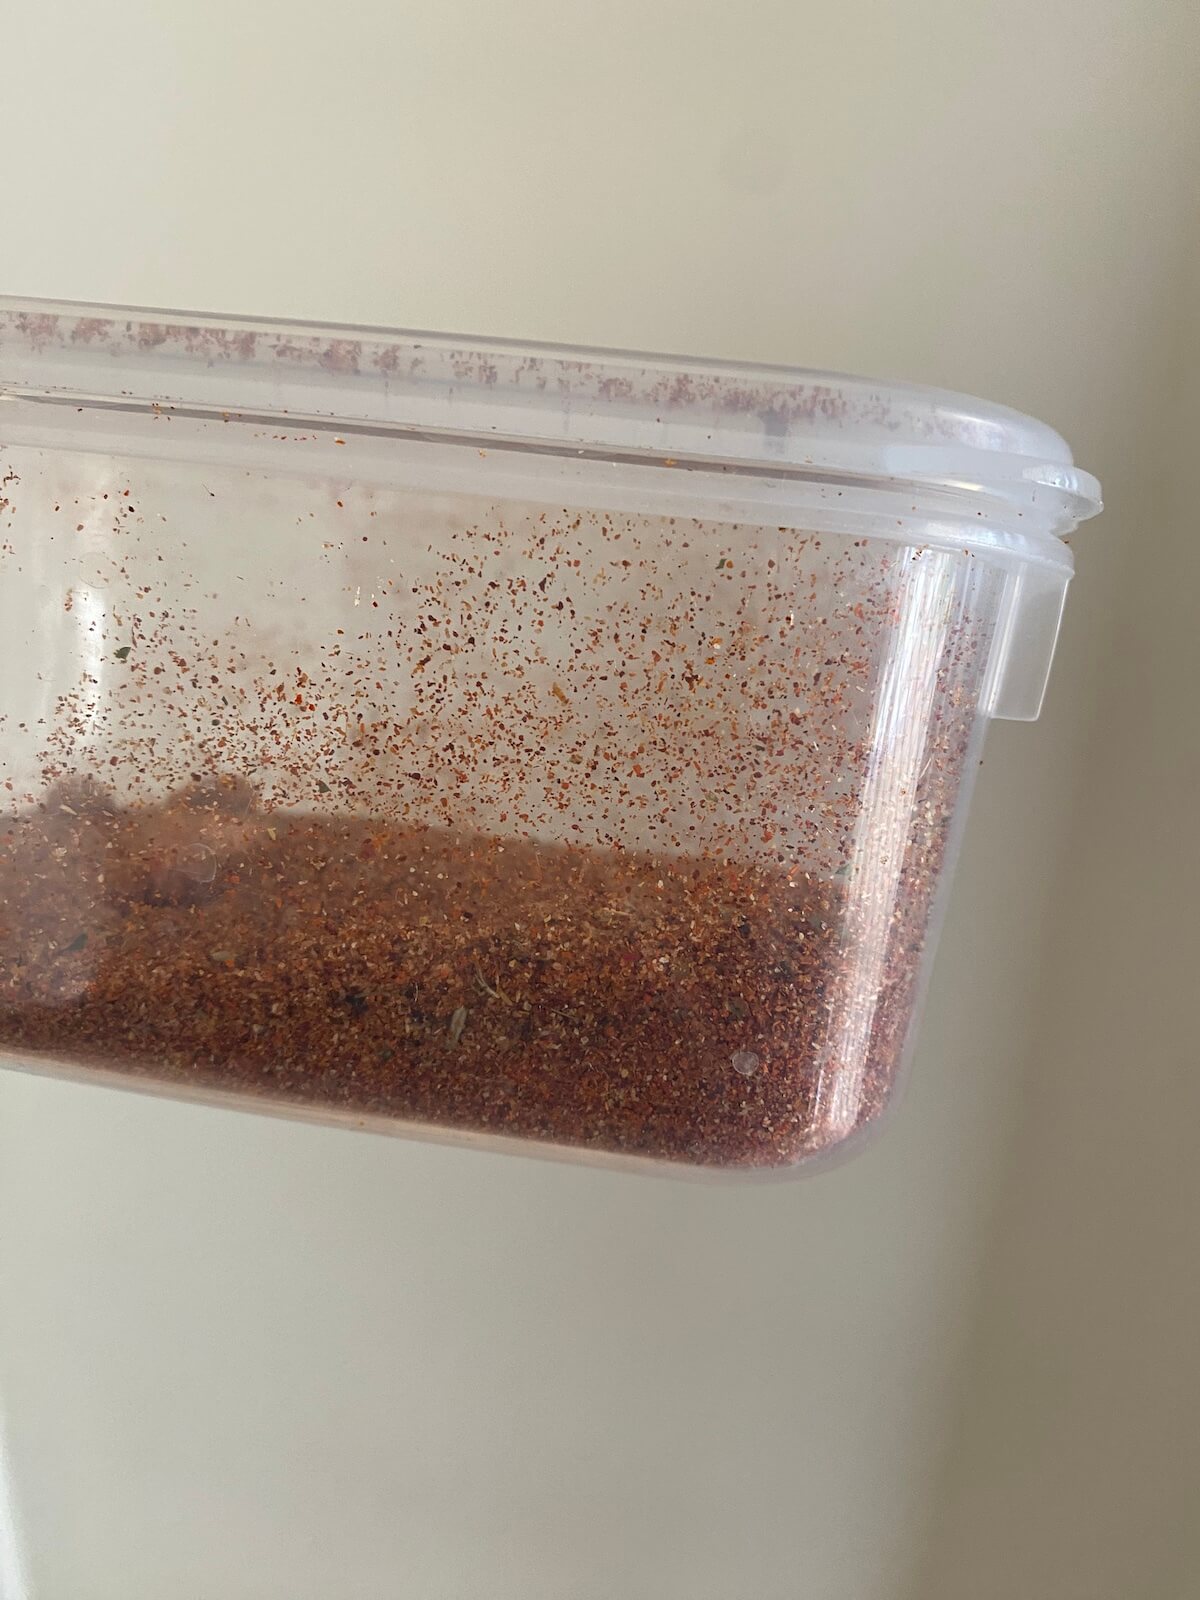 pork dry rub stored in an airtight plastic container